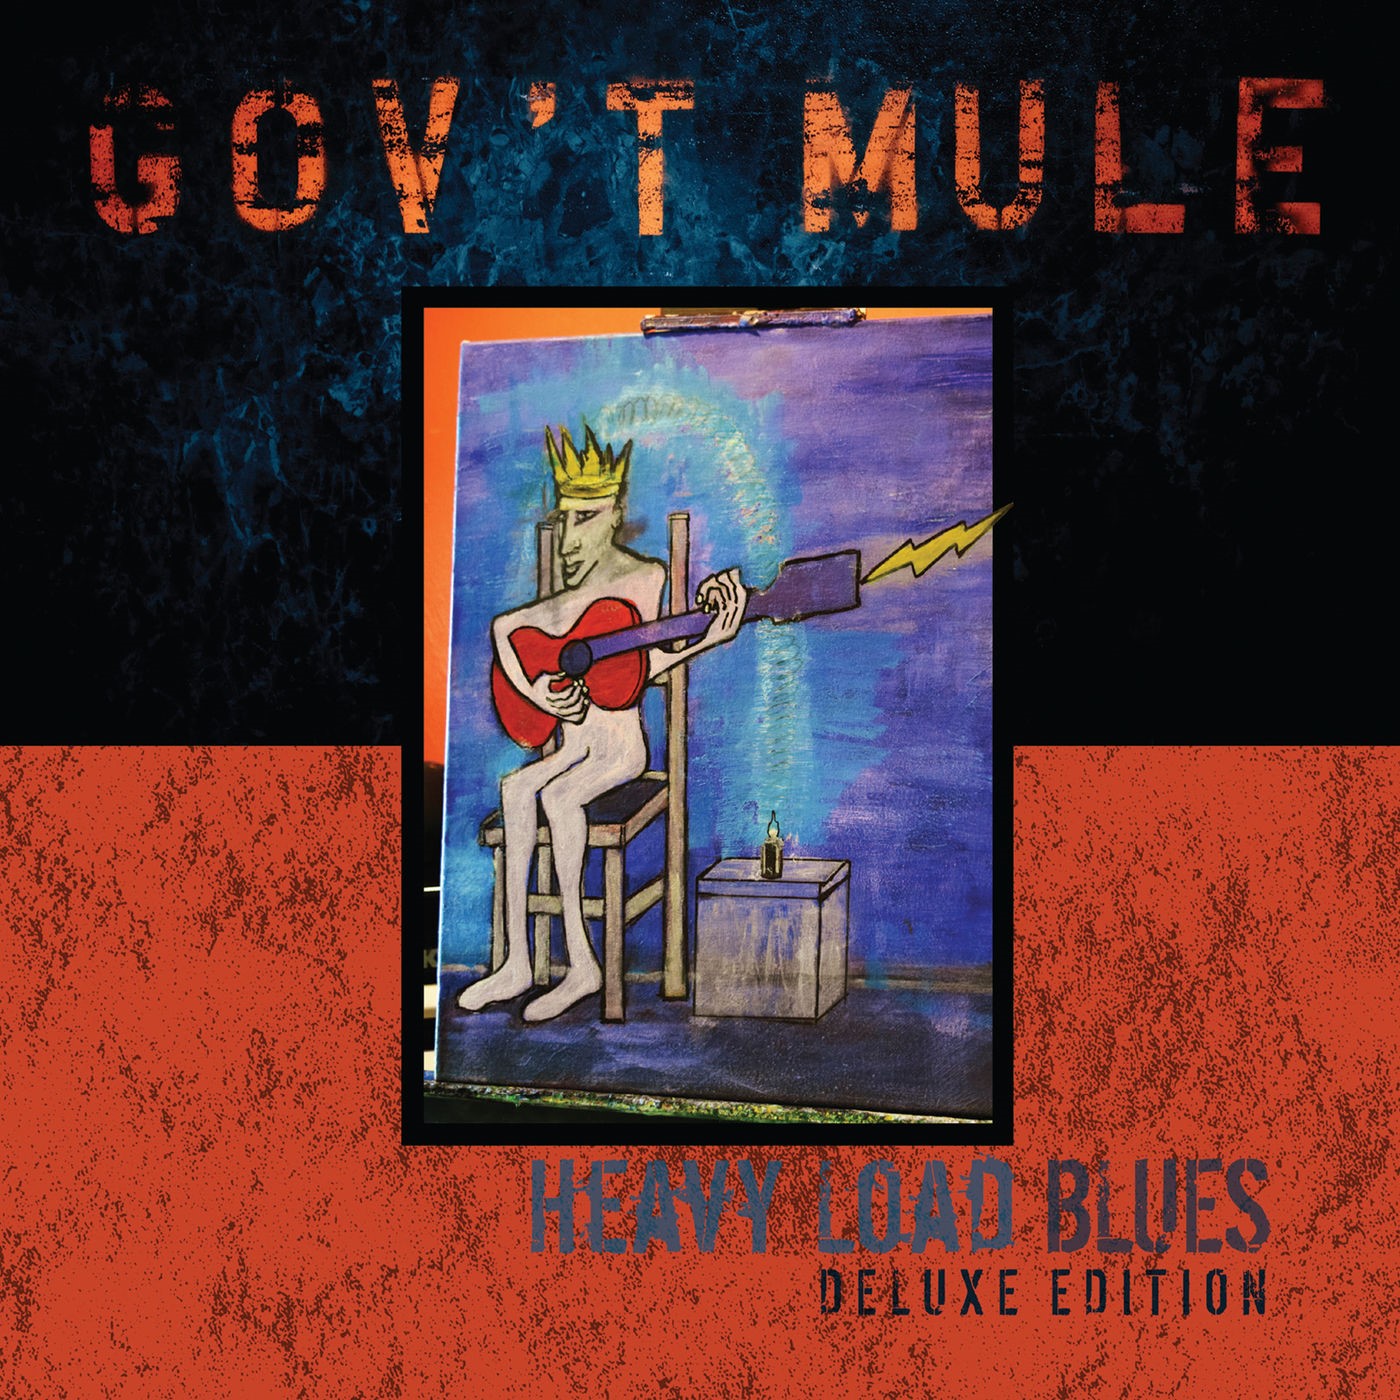 Gov't Mule - Heavy Load Blues DeLuxe Edition in DTS-HD-*HRA* ( OSV )